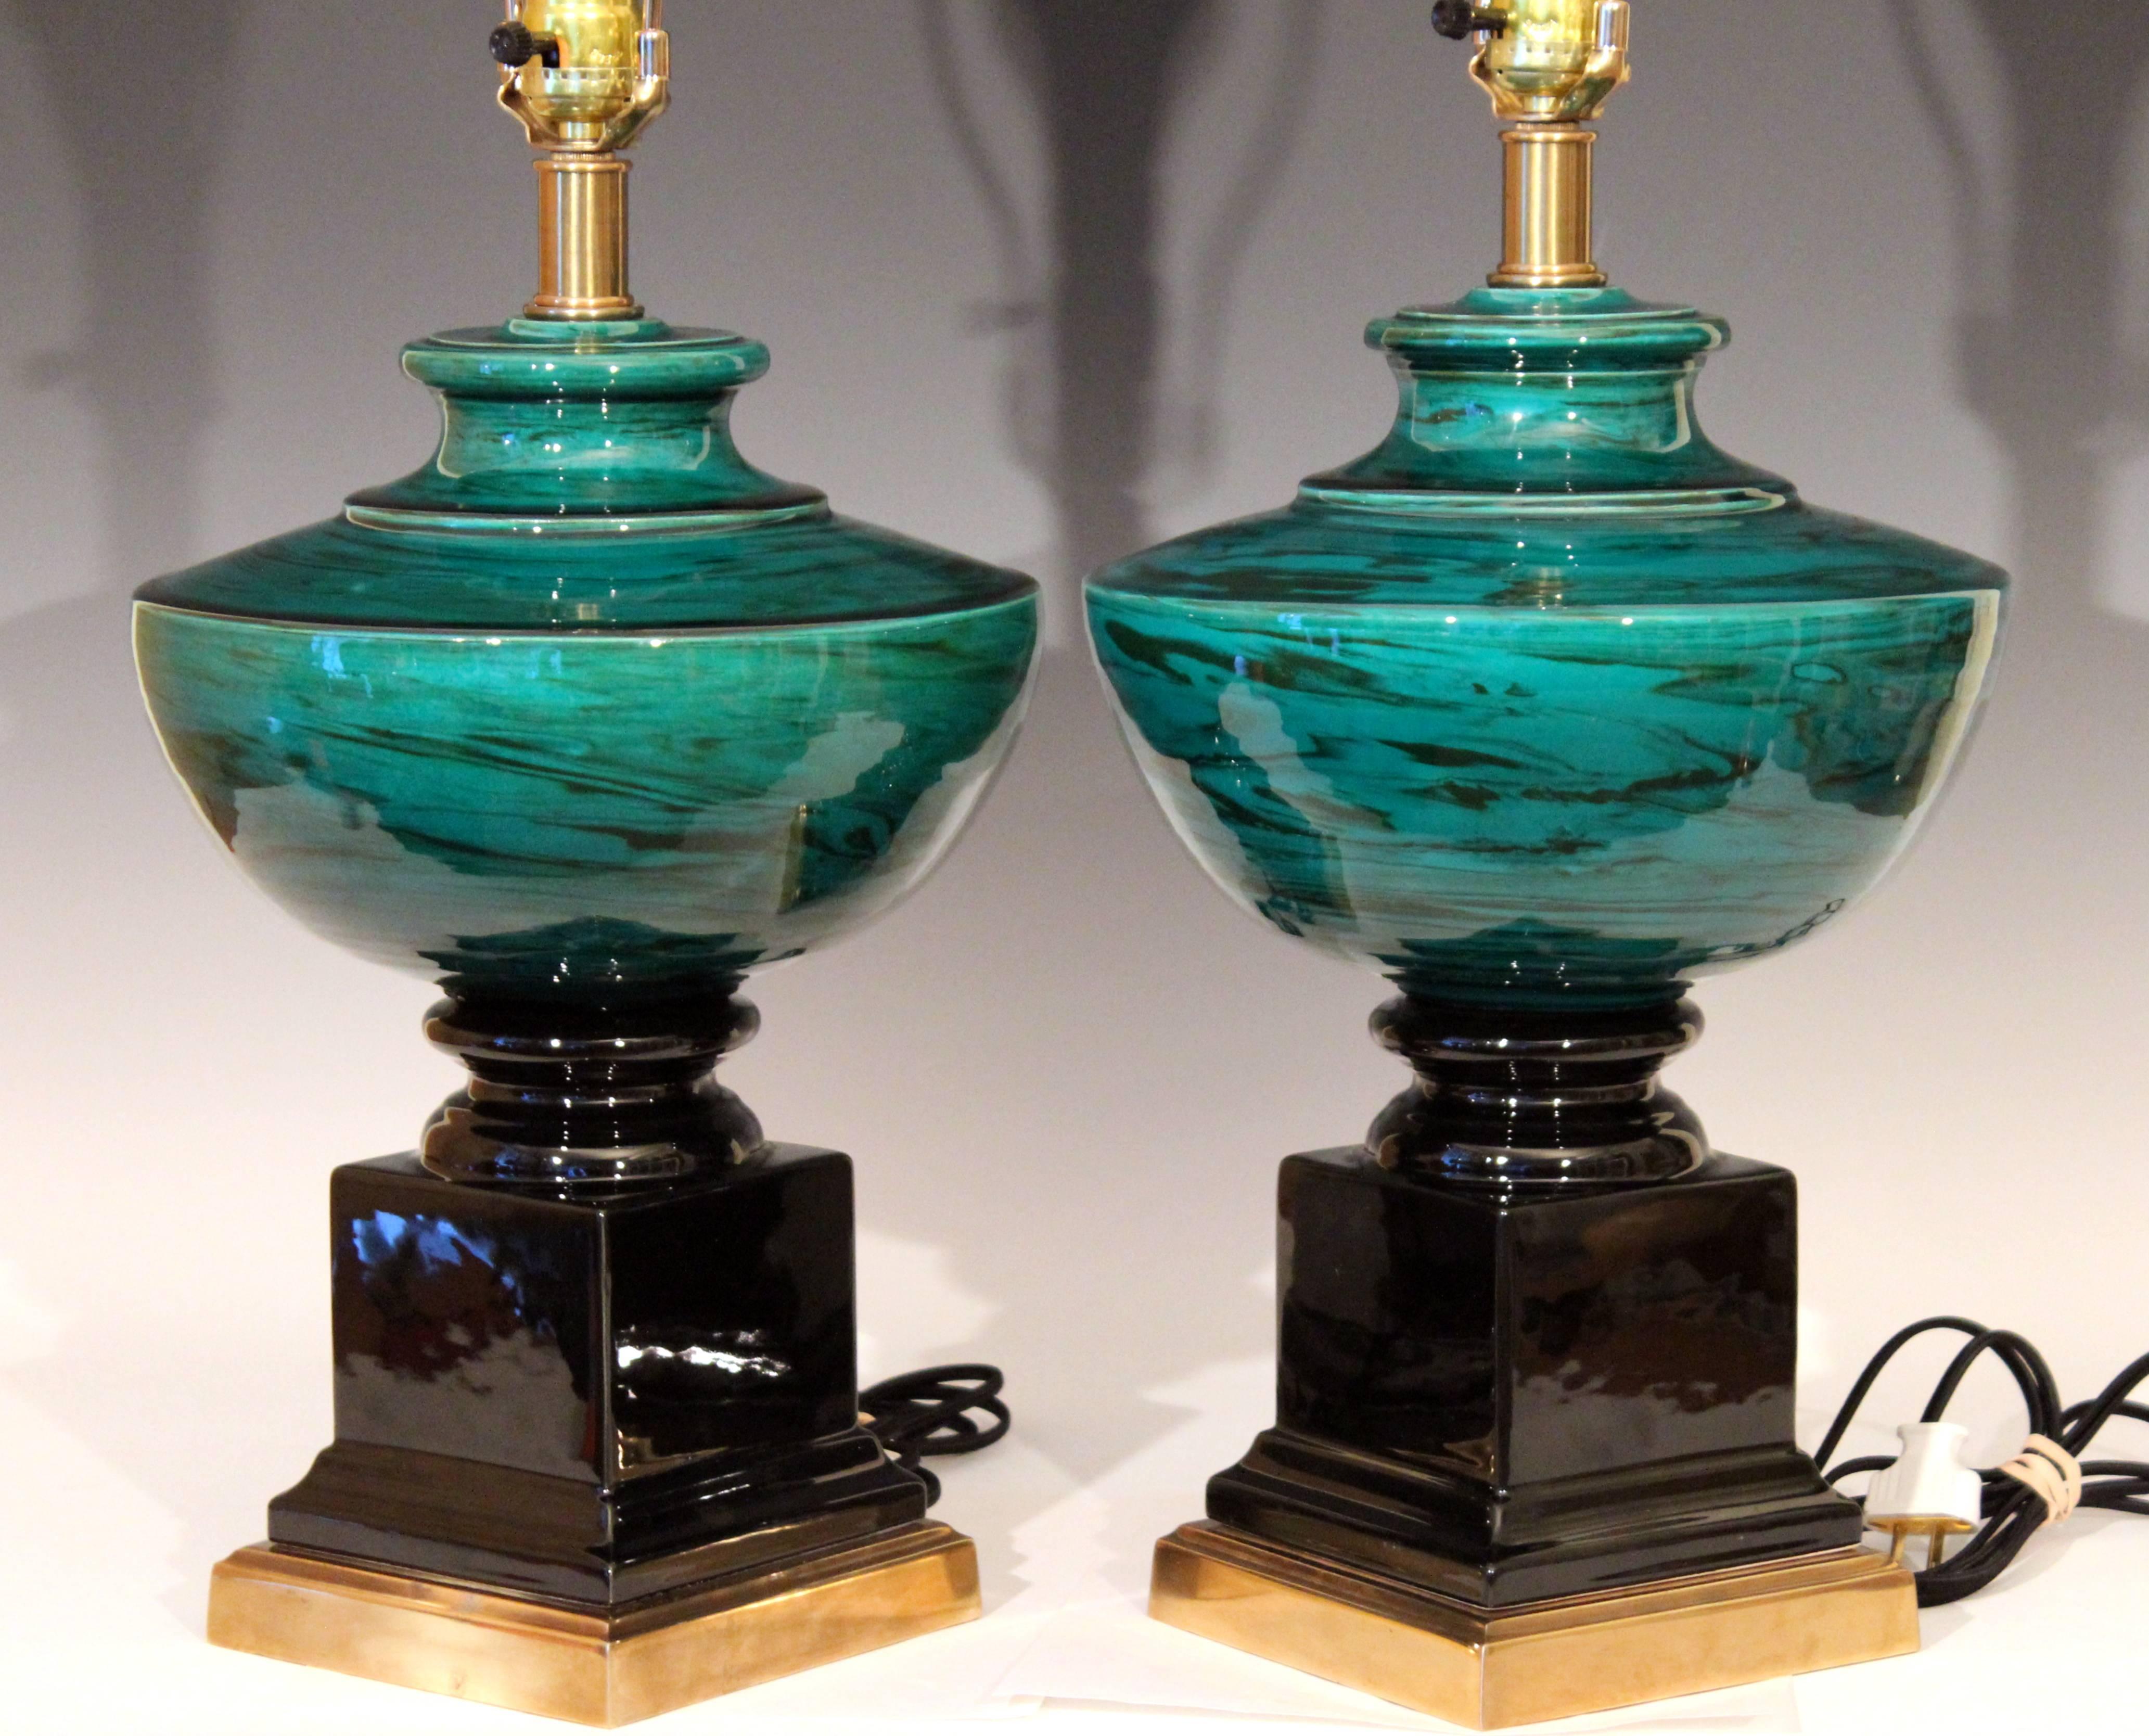 Sleek pair of vintage Bitossi pottery lamps in Classic Georgian form. Reinvigorated to striking effect with hand-turned green marbleized urns and separate gloss black molded pedestals, circa early 1980s. Measures: 29" high overall, 16" to